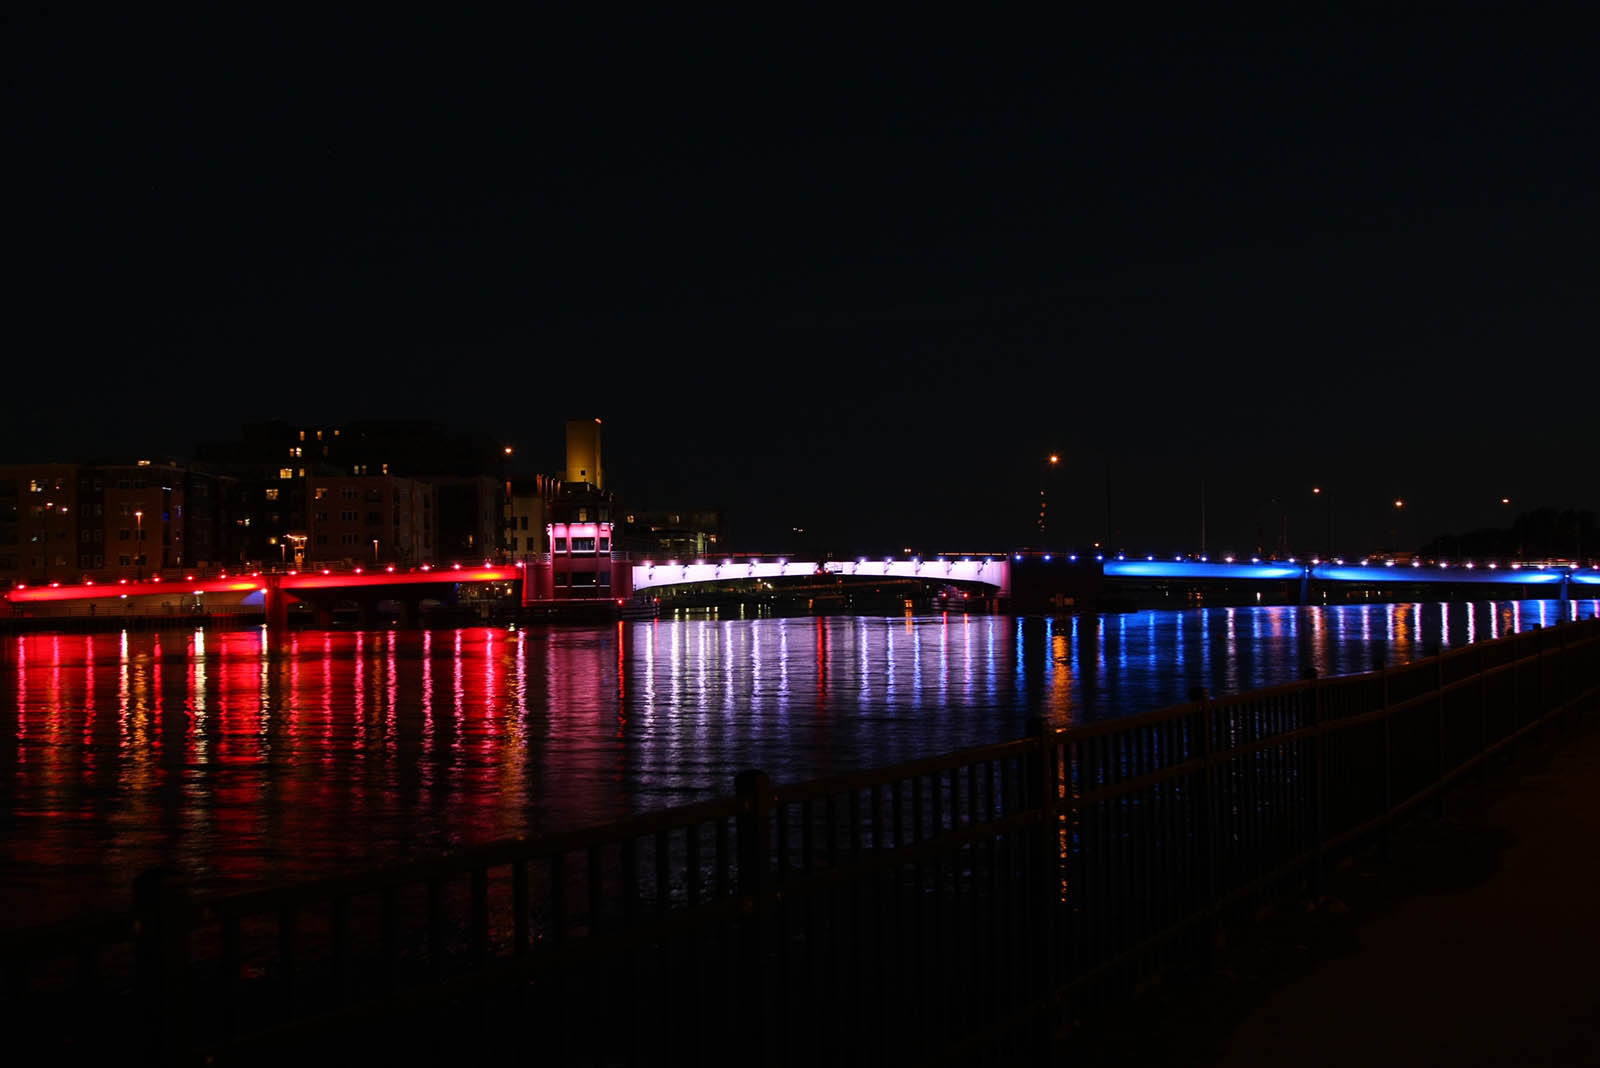 Red, white, and blue LED lighting patterns on the Ray Nitschke (Main St.) bridge in Green Bay, WI